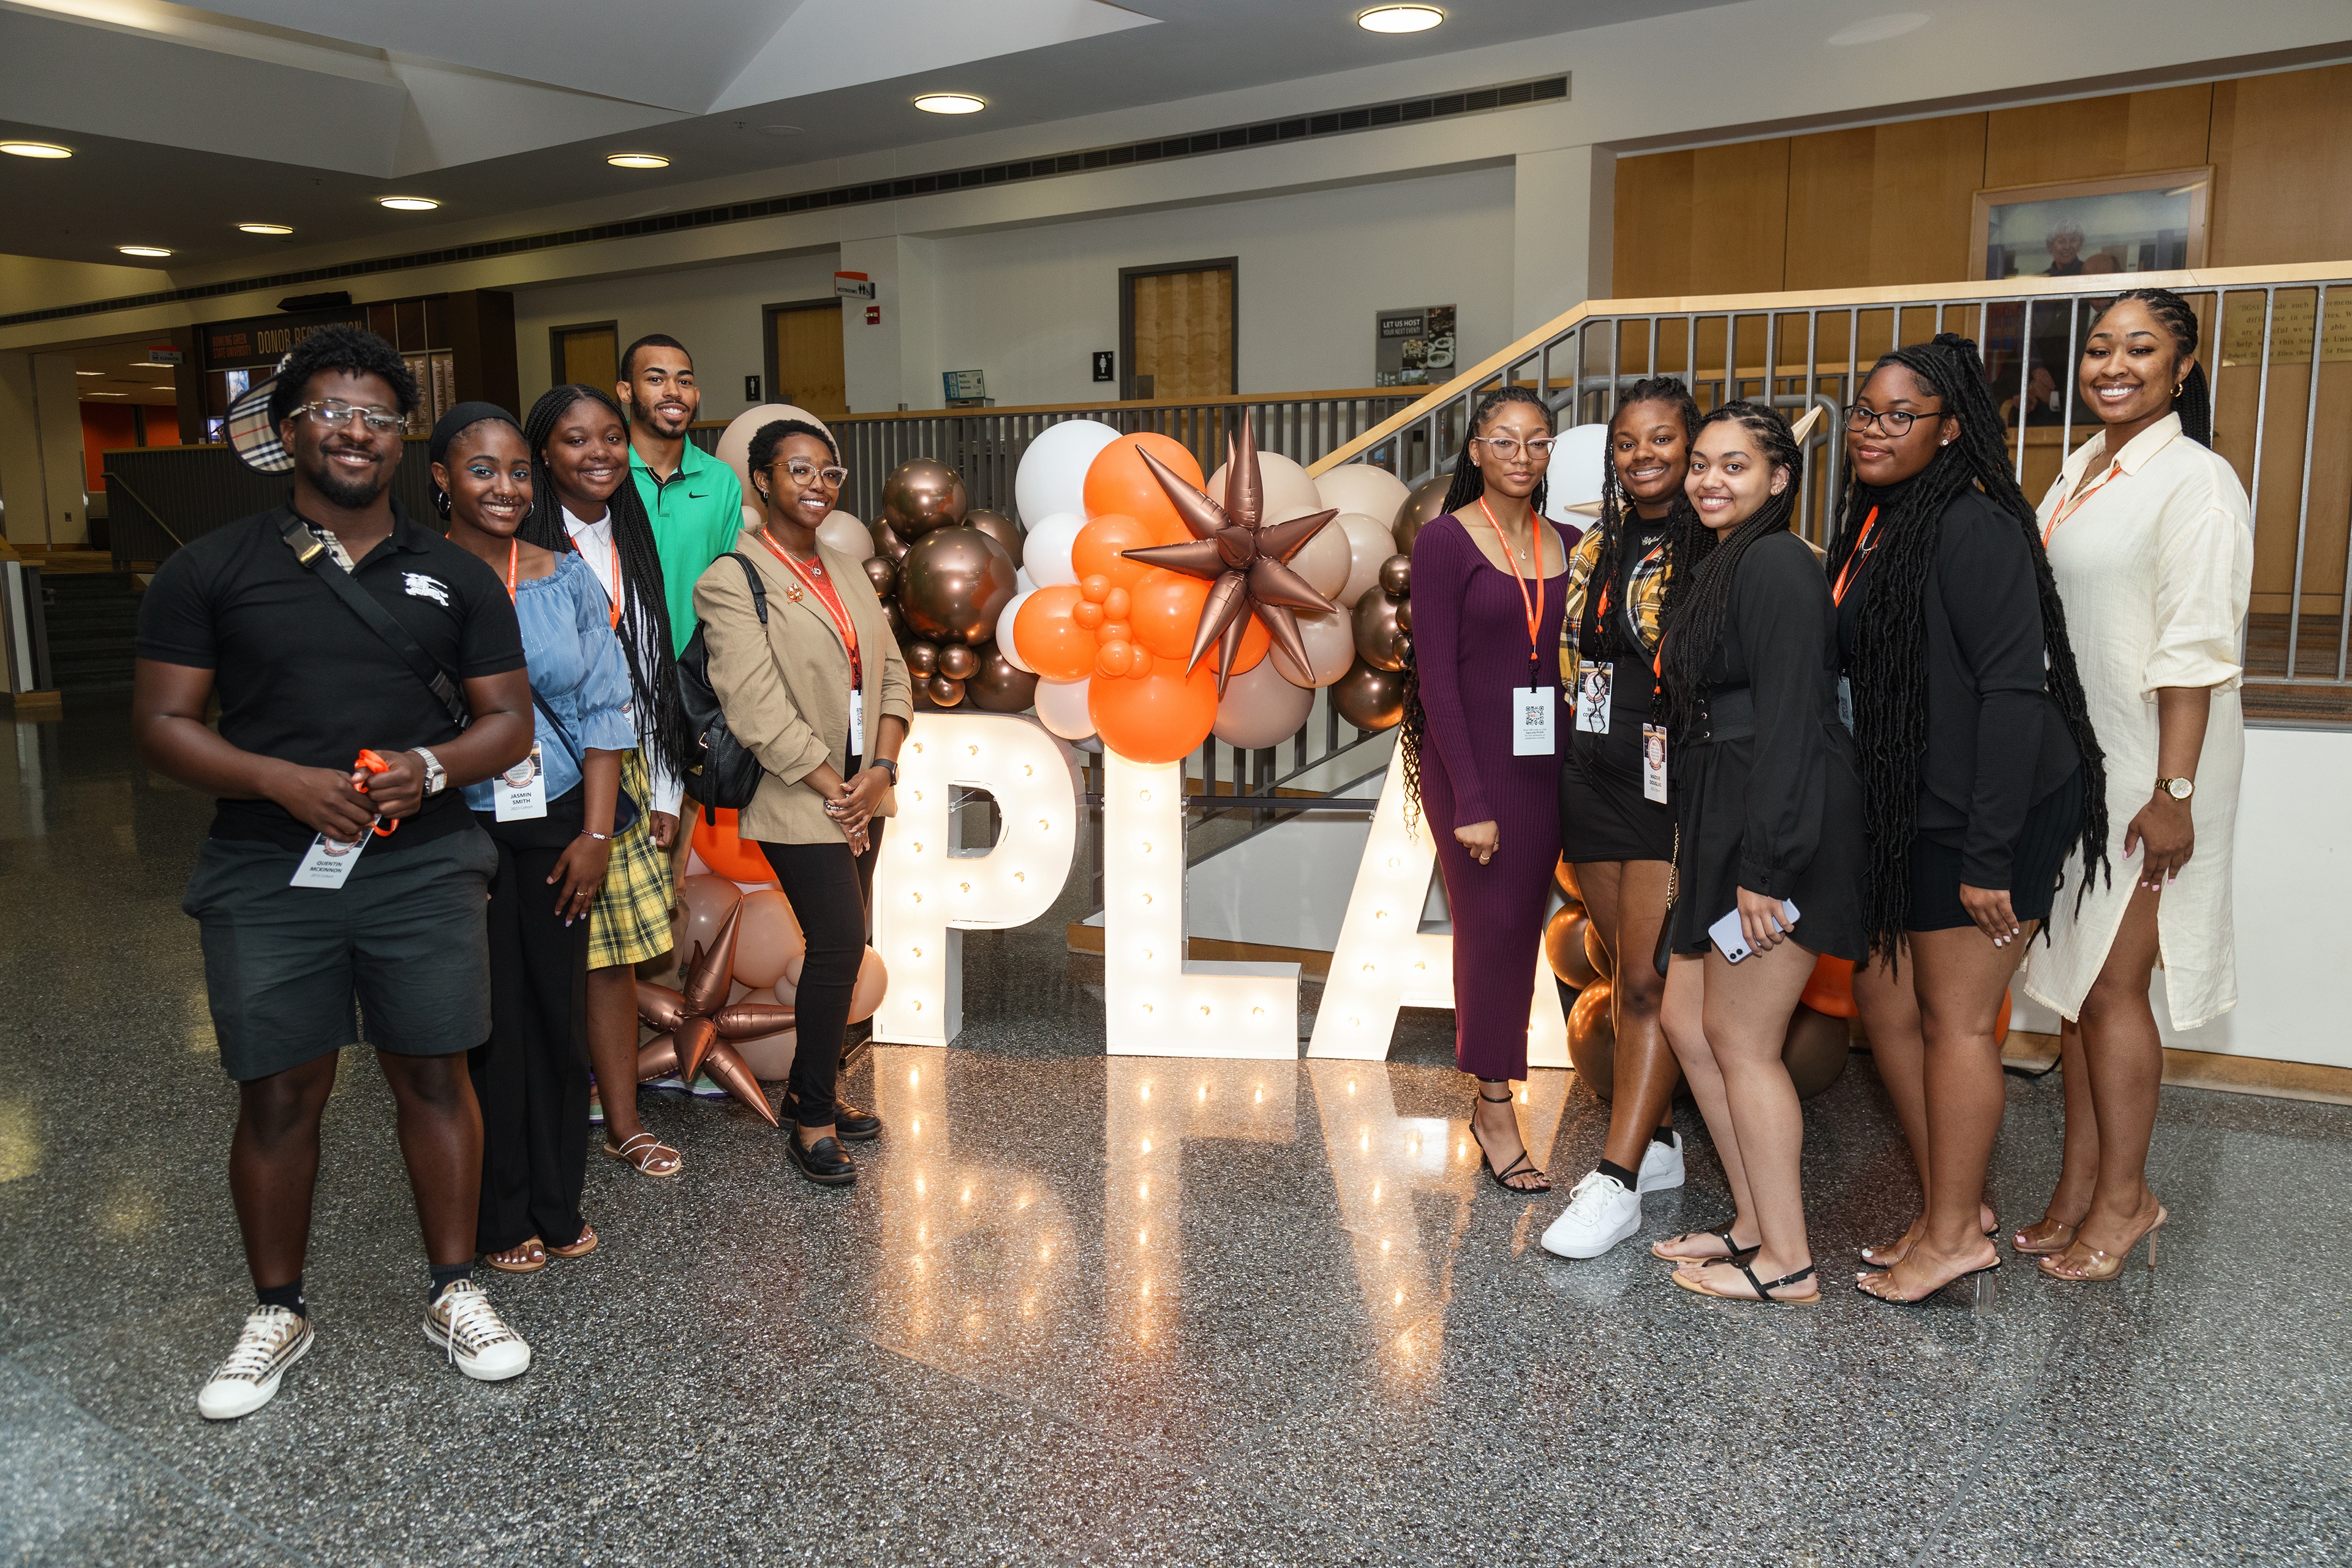 The PLA 25th anniversary celebration, held July 14-15, welcomed back alumni, University dignitaries and supporters to reflect on the impact of the development program. (BGSU photo)